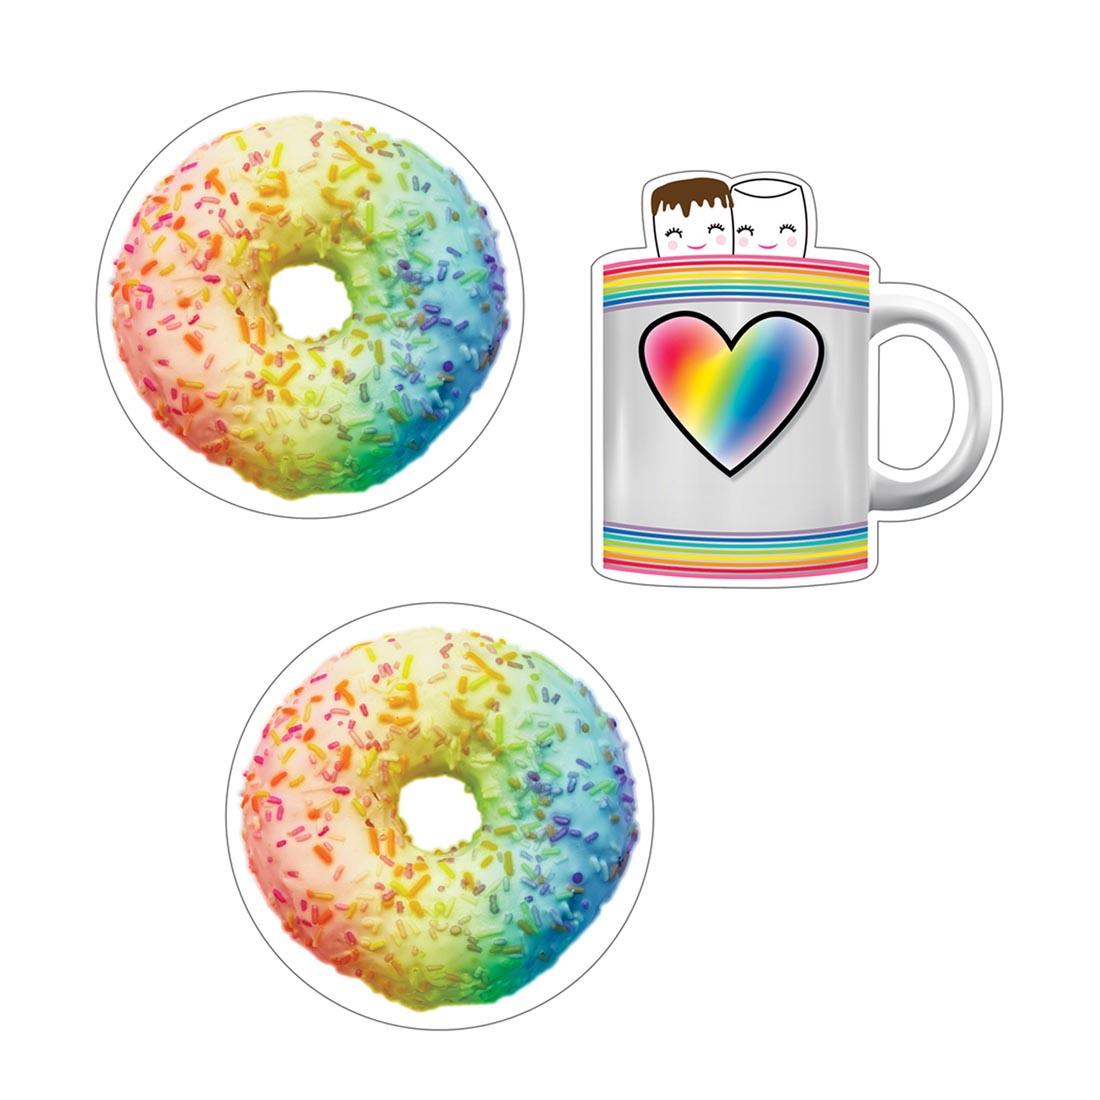 Donuts and Cocoa Mug Colorful Cut-Outs from the Industrial Cafe collection by Carson Dellosa